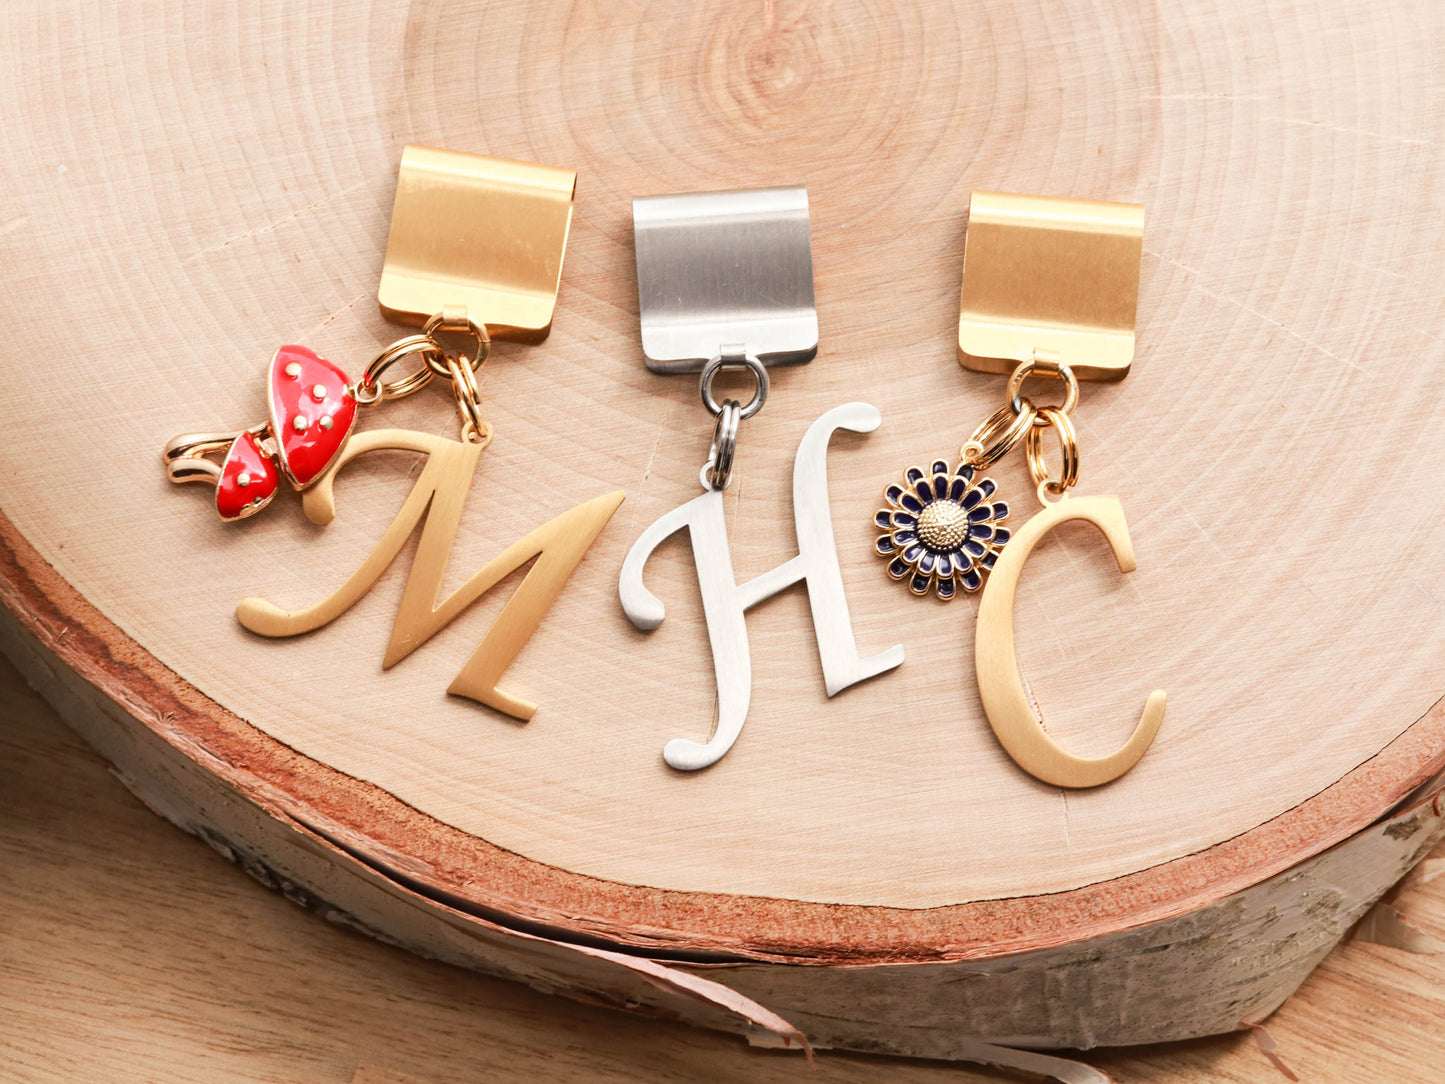 Cursive letter collar charms from Lucky Tags.